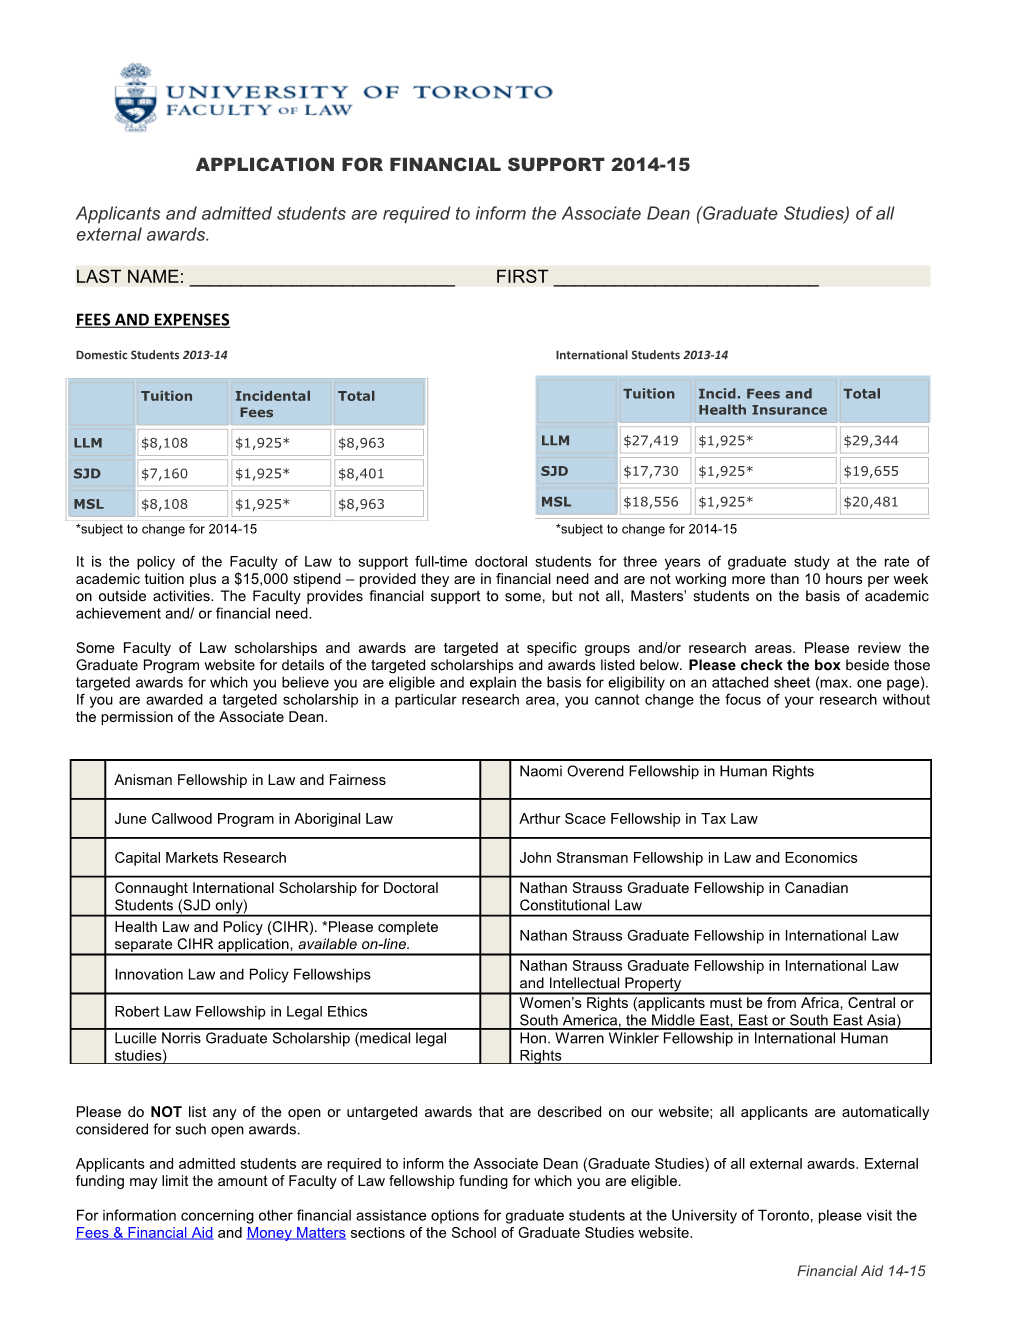 Application for Financial Support 2014-15